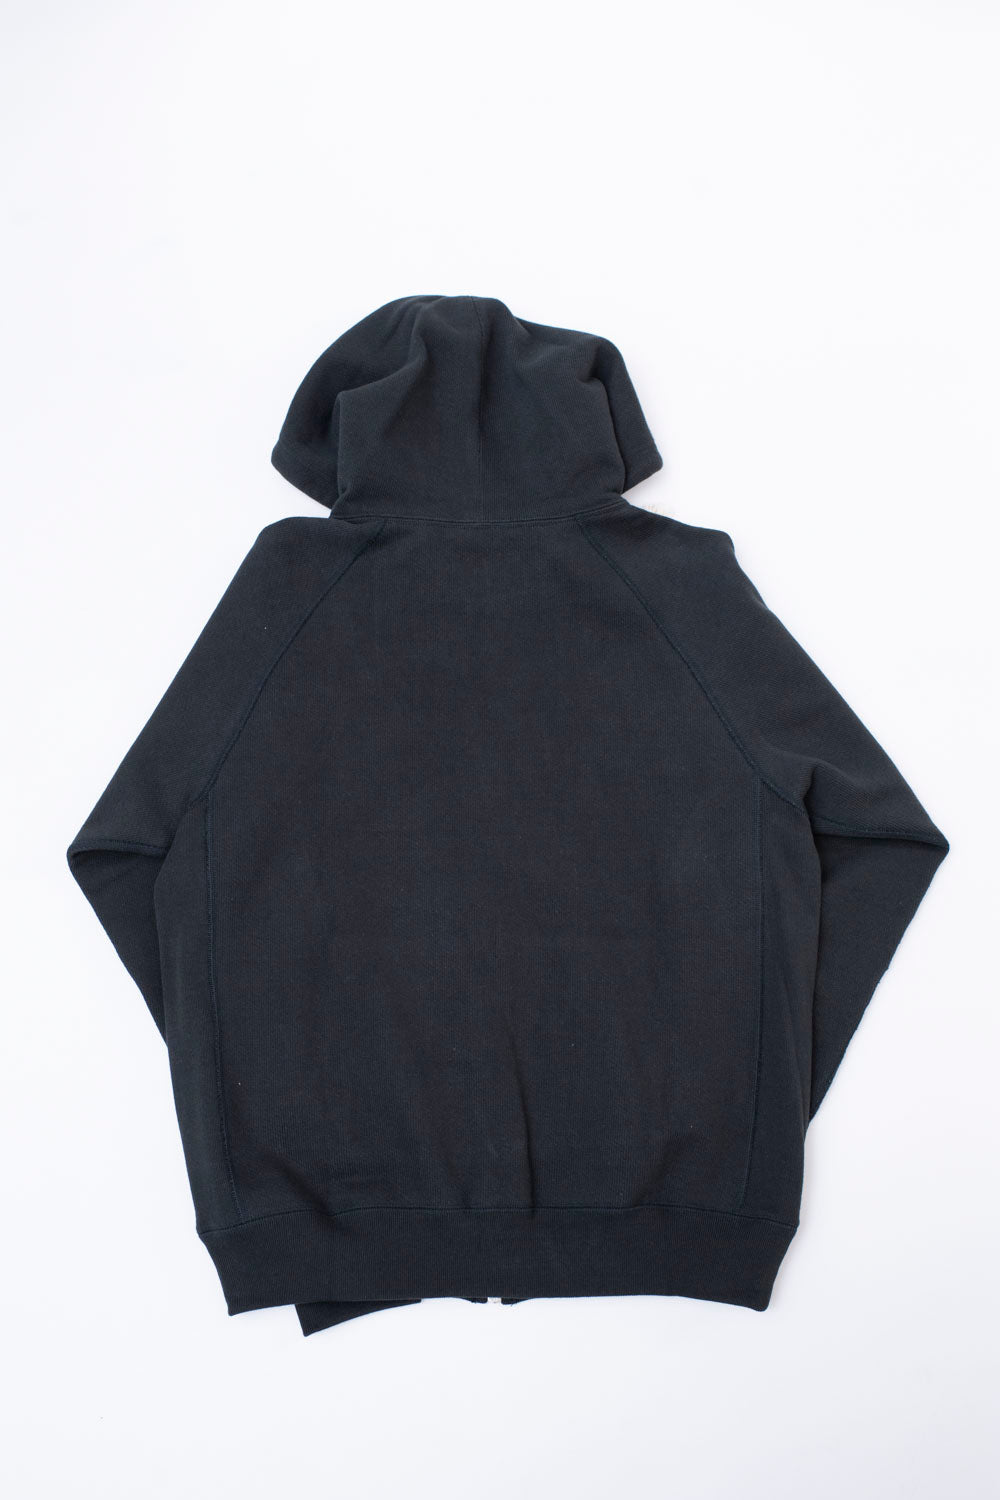 Zip Hoodie 701gsm Double Heavyweight French Terry - Sumi Black